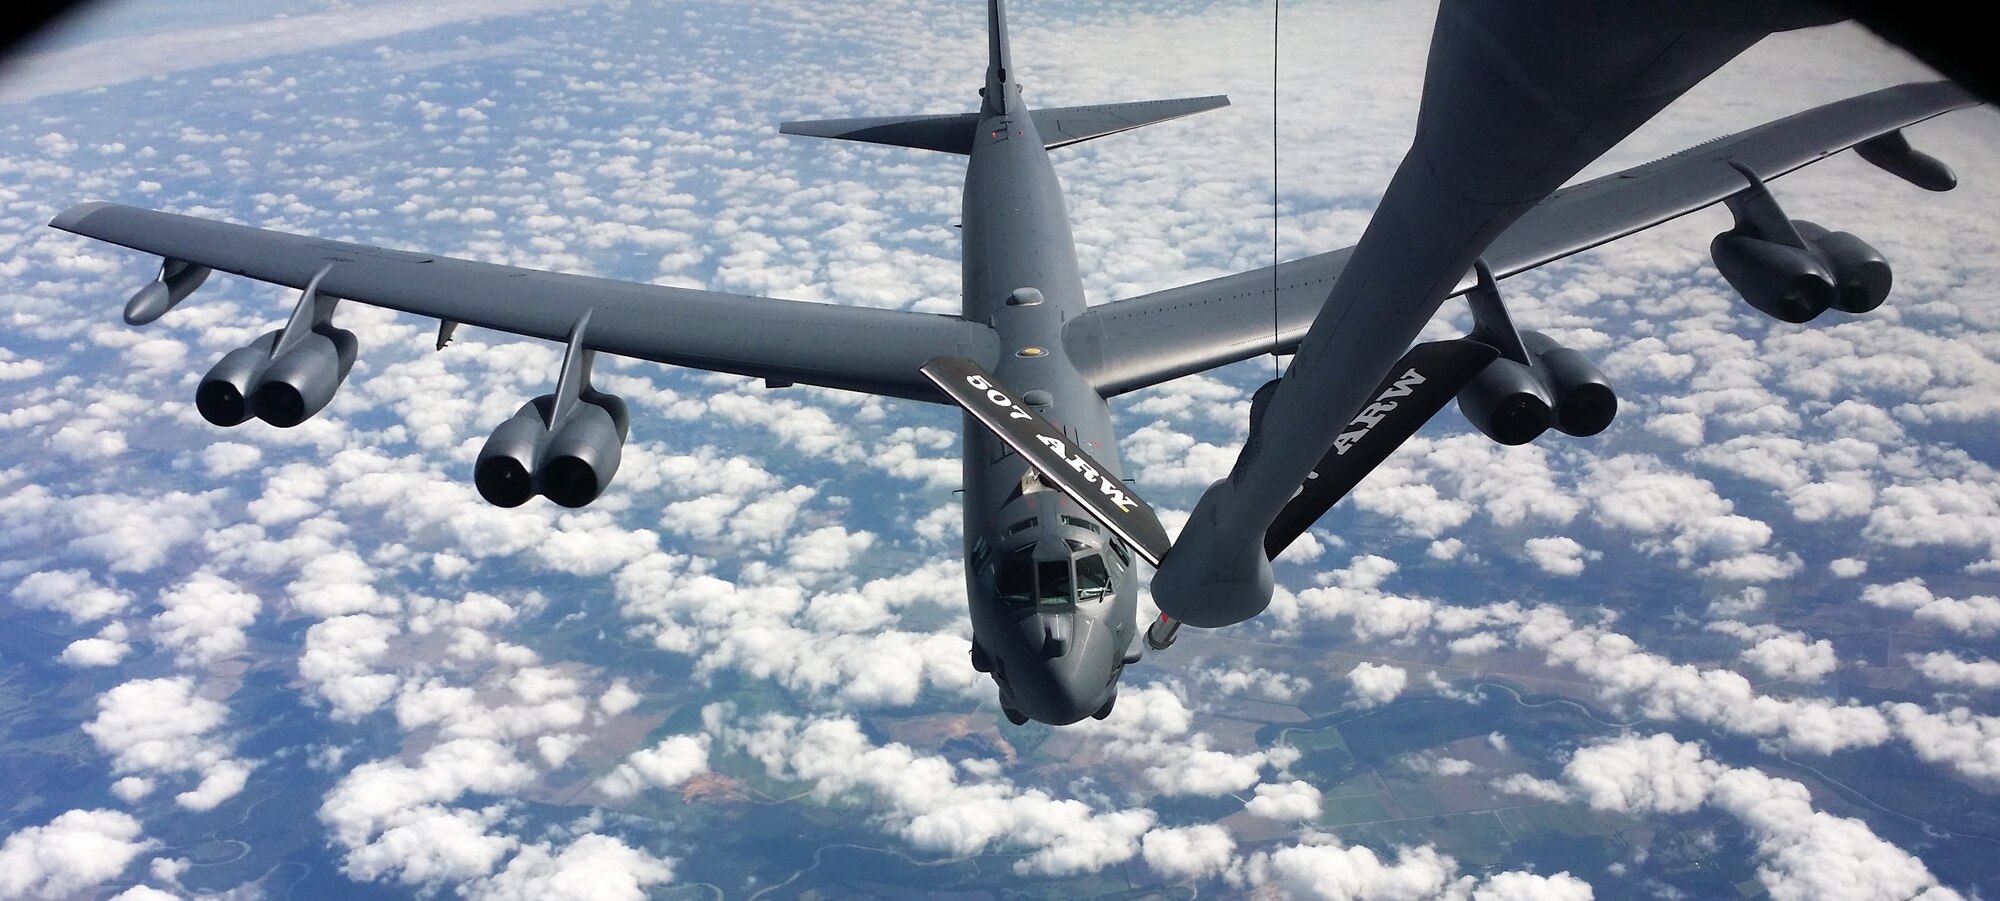 A KC-135R Stratotanker flown by a 465th Air Refueling Squadron crew from Tinker Air Force Base refuels a B-52 Stratofortress over the skies of Texas, Aug. 17. The B-52 crew flew out of Barksdale AFB and conducted several aerial refueling evaluations during the training exercise. (U.S. Air Force photo/Maj. Jon Quinlan)